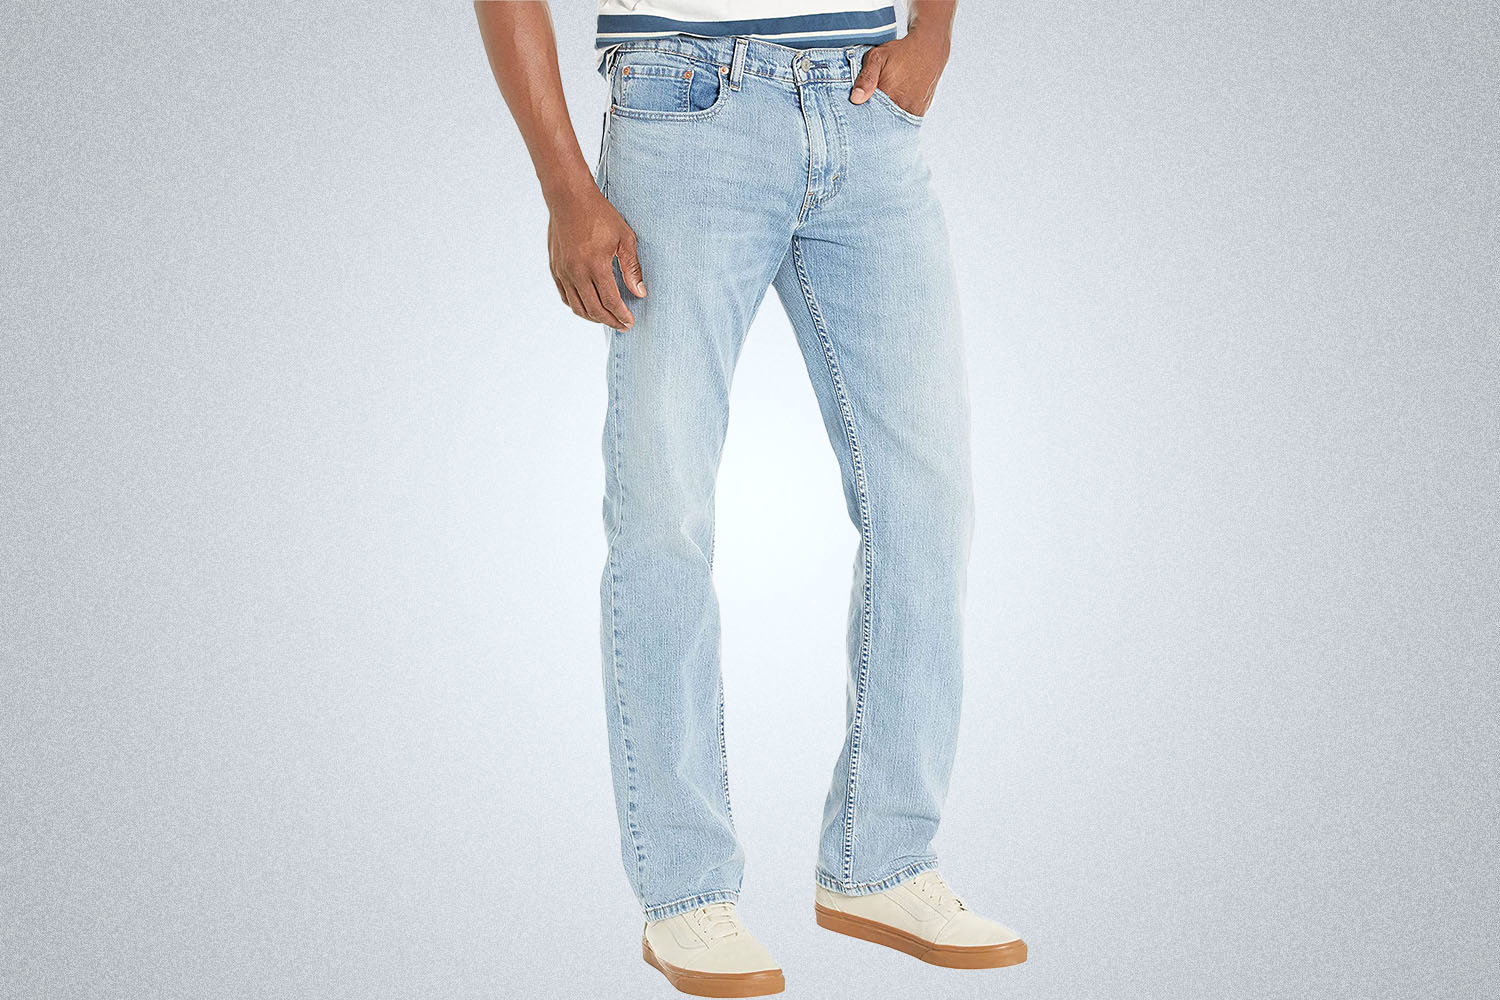 For One Day Only, Denim Is 25% Off at Zappos - InsideHook